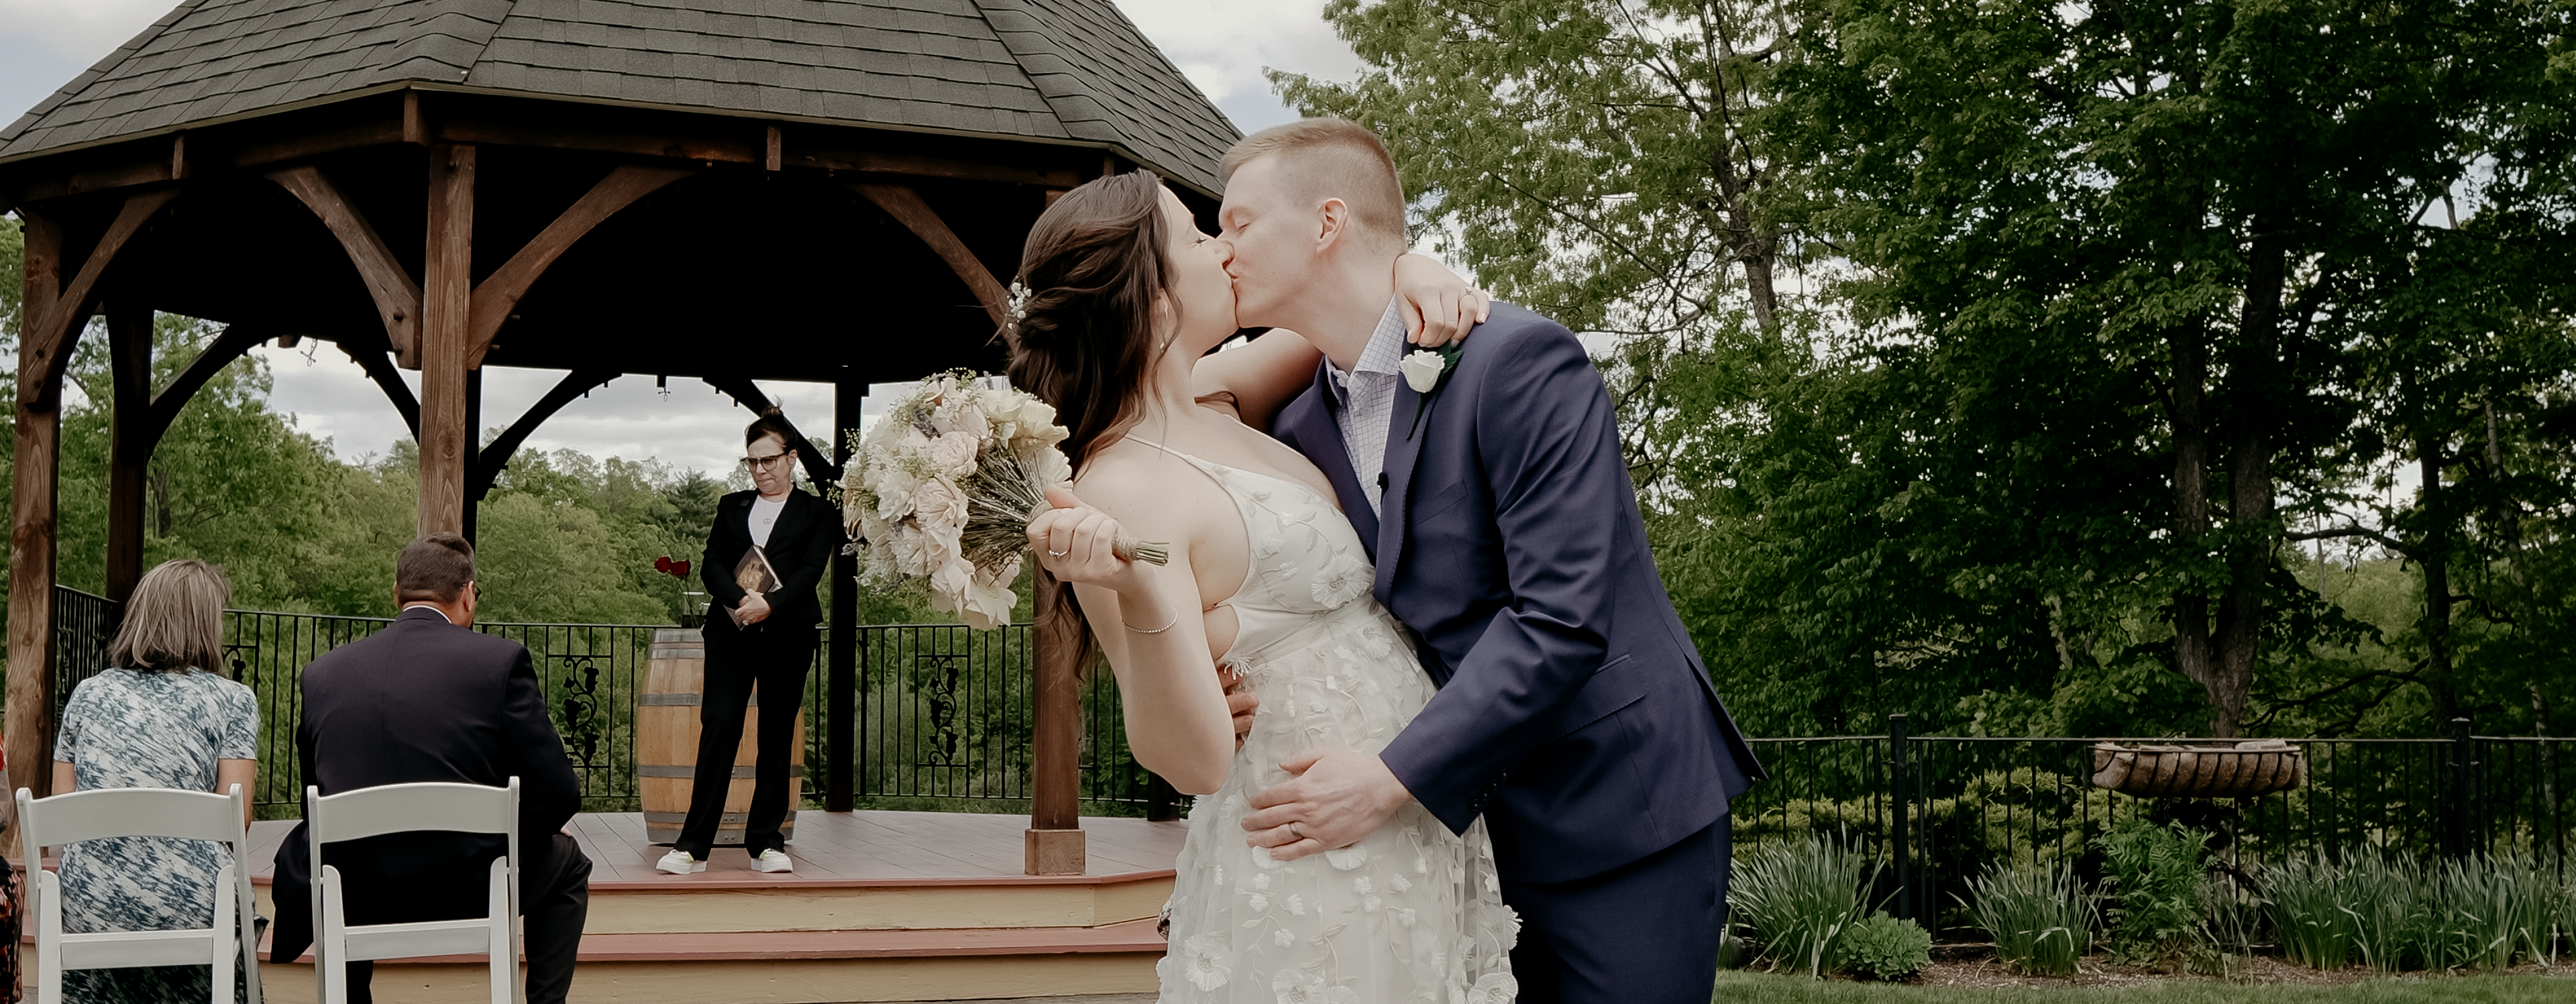 Couple kissing in front of a gazebo. Bride is wearing a white dress with flower accents. She is holding her bouquet up. Groom is wearing a blue suit and has his hands wrapped around her waist.